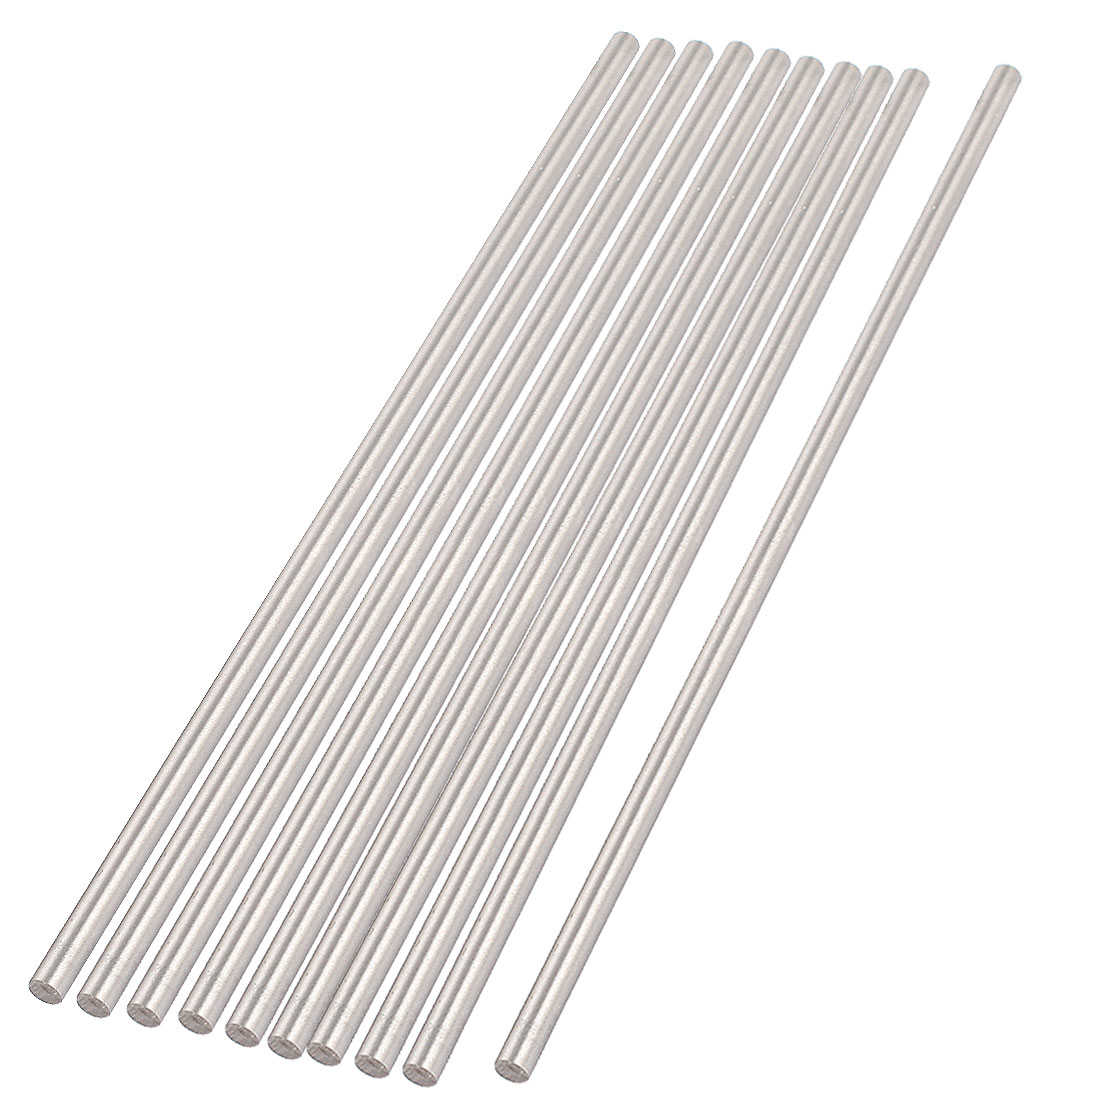 Unique Bargains 10 Pcs 5mmx200mm HSS High Speed Steel Turning Carbide Stick Bars for CNC Lathe